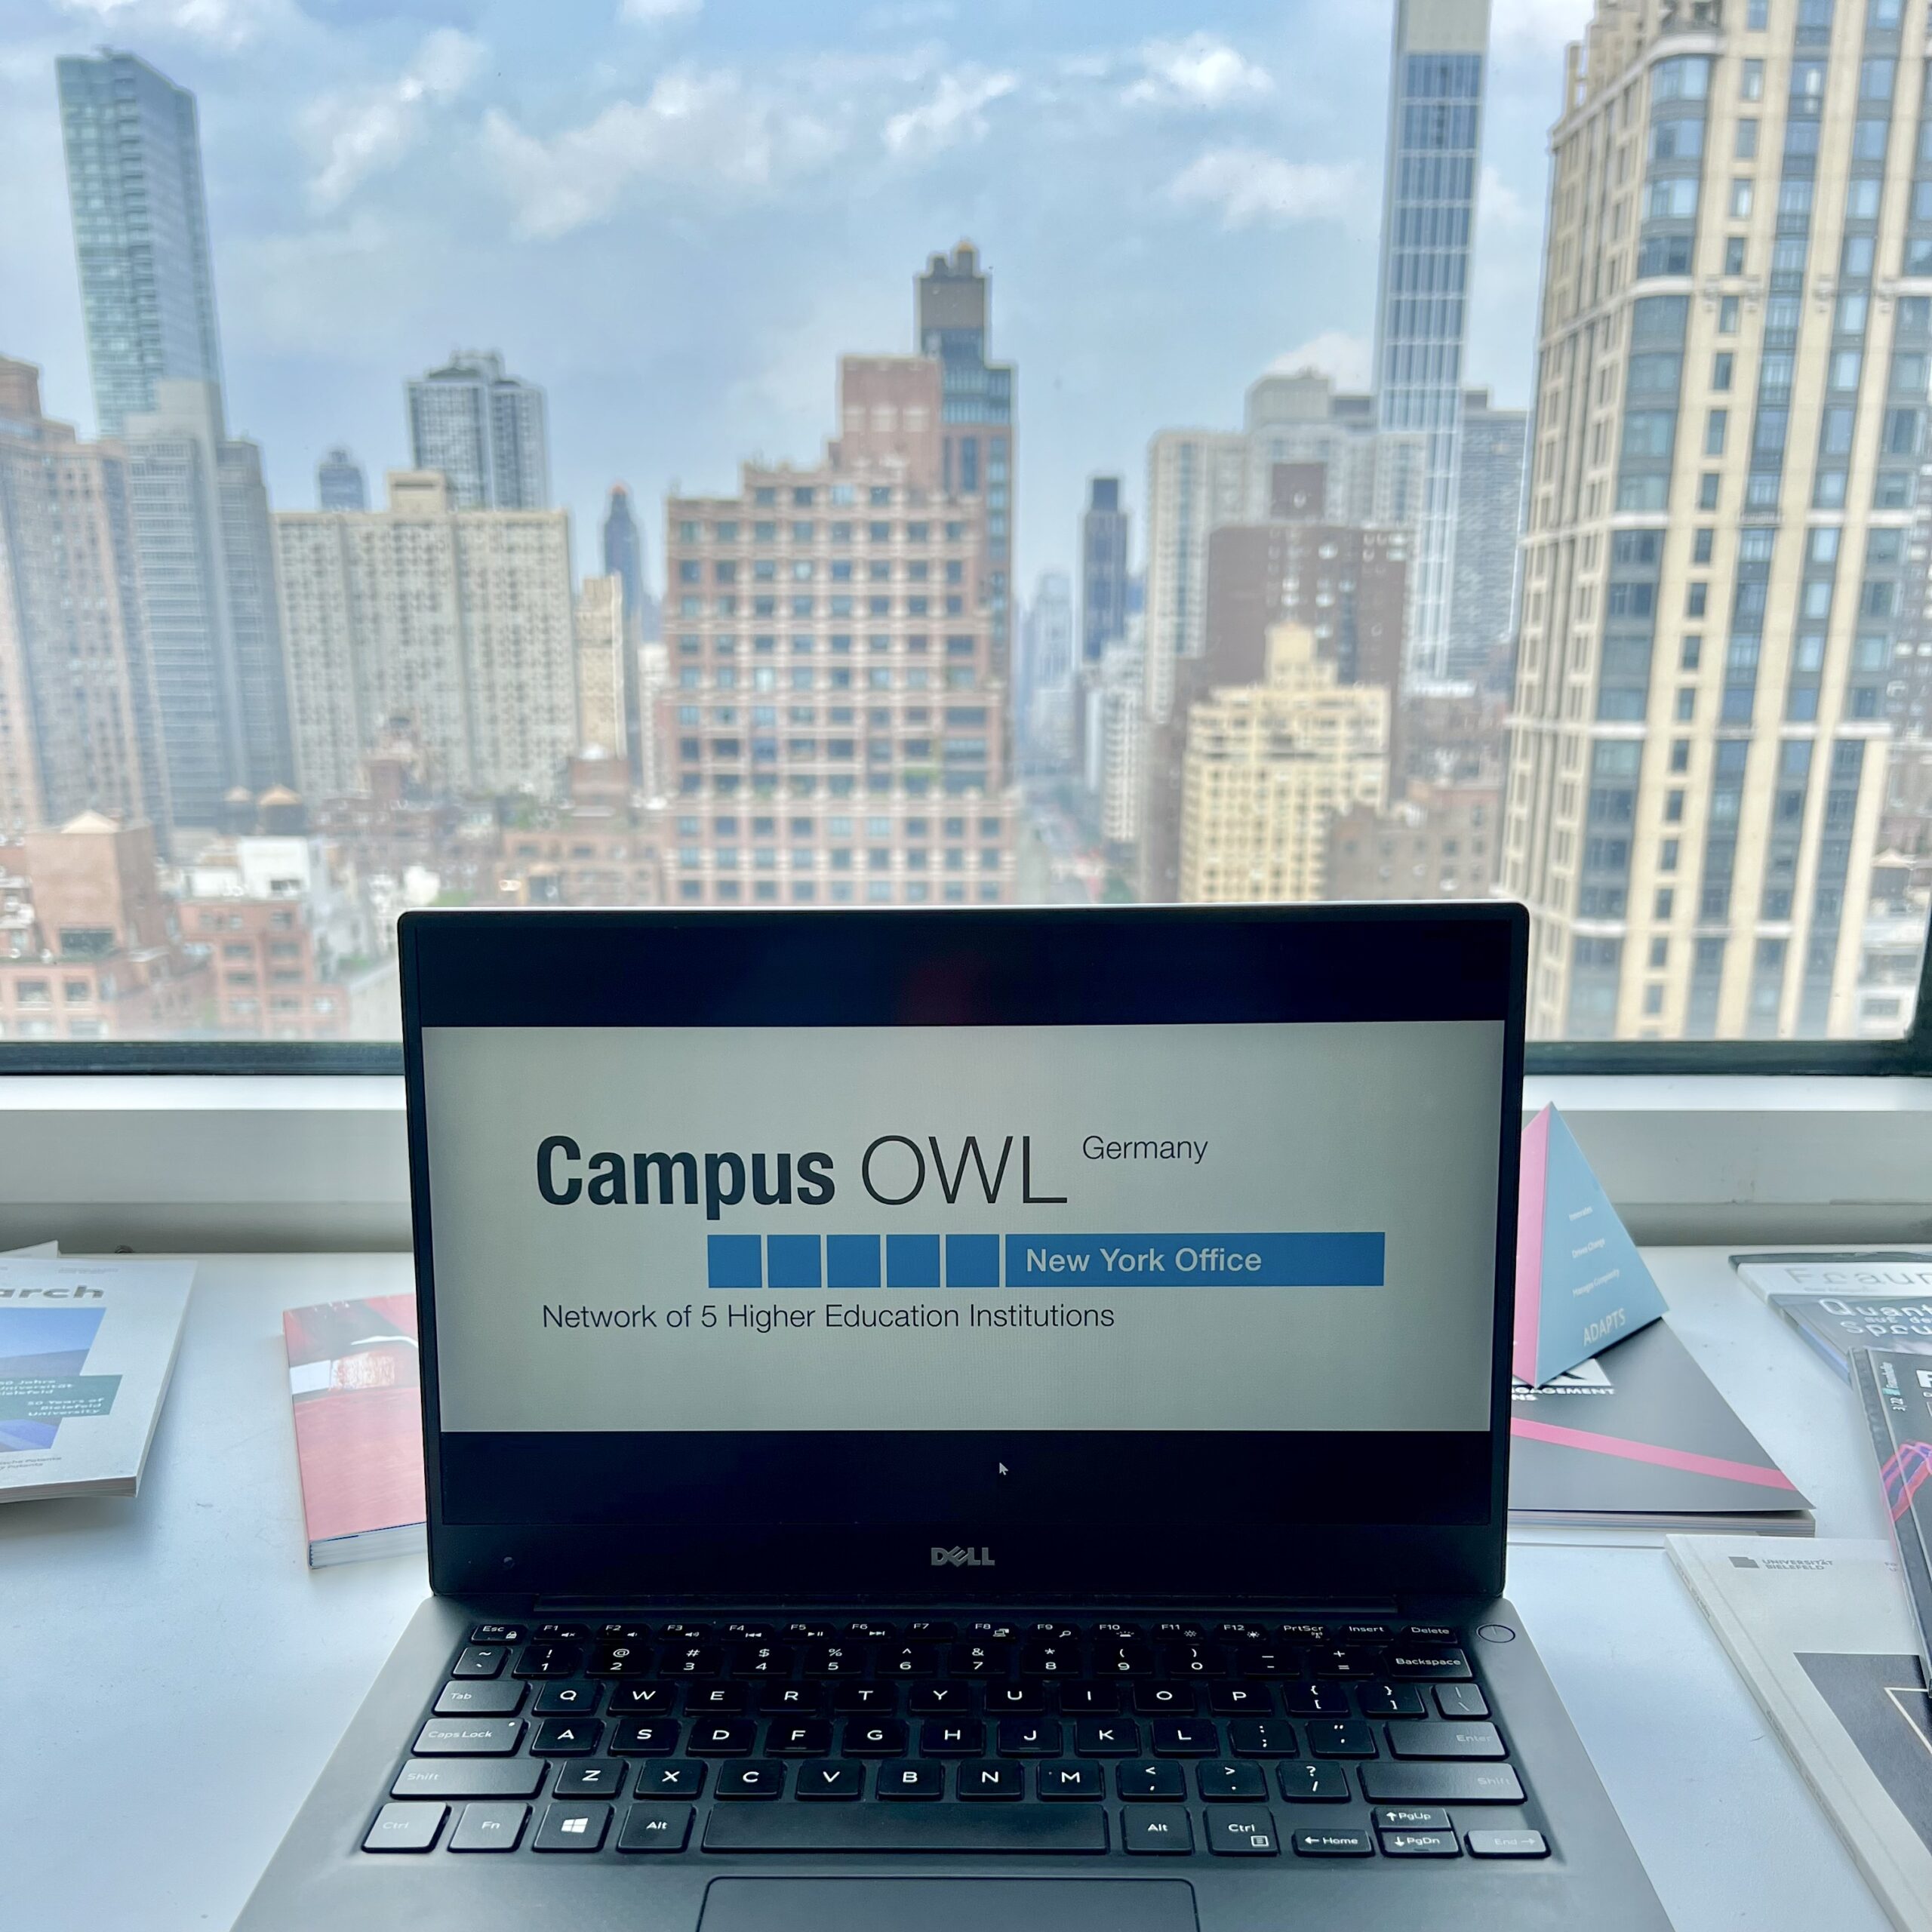 A laptop with Campus OWL logo in front of New York skyline